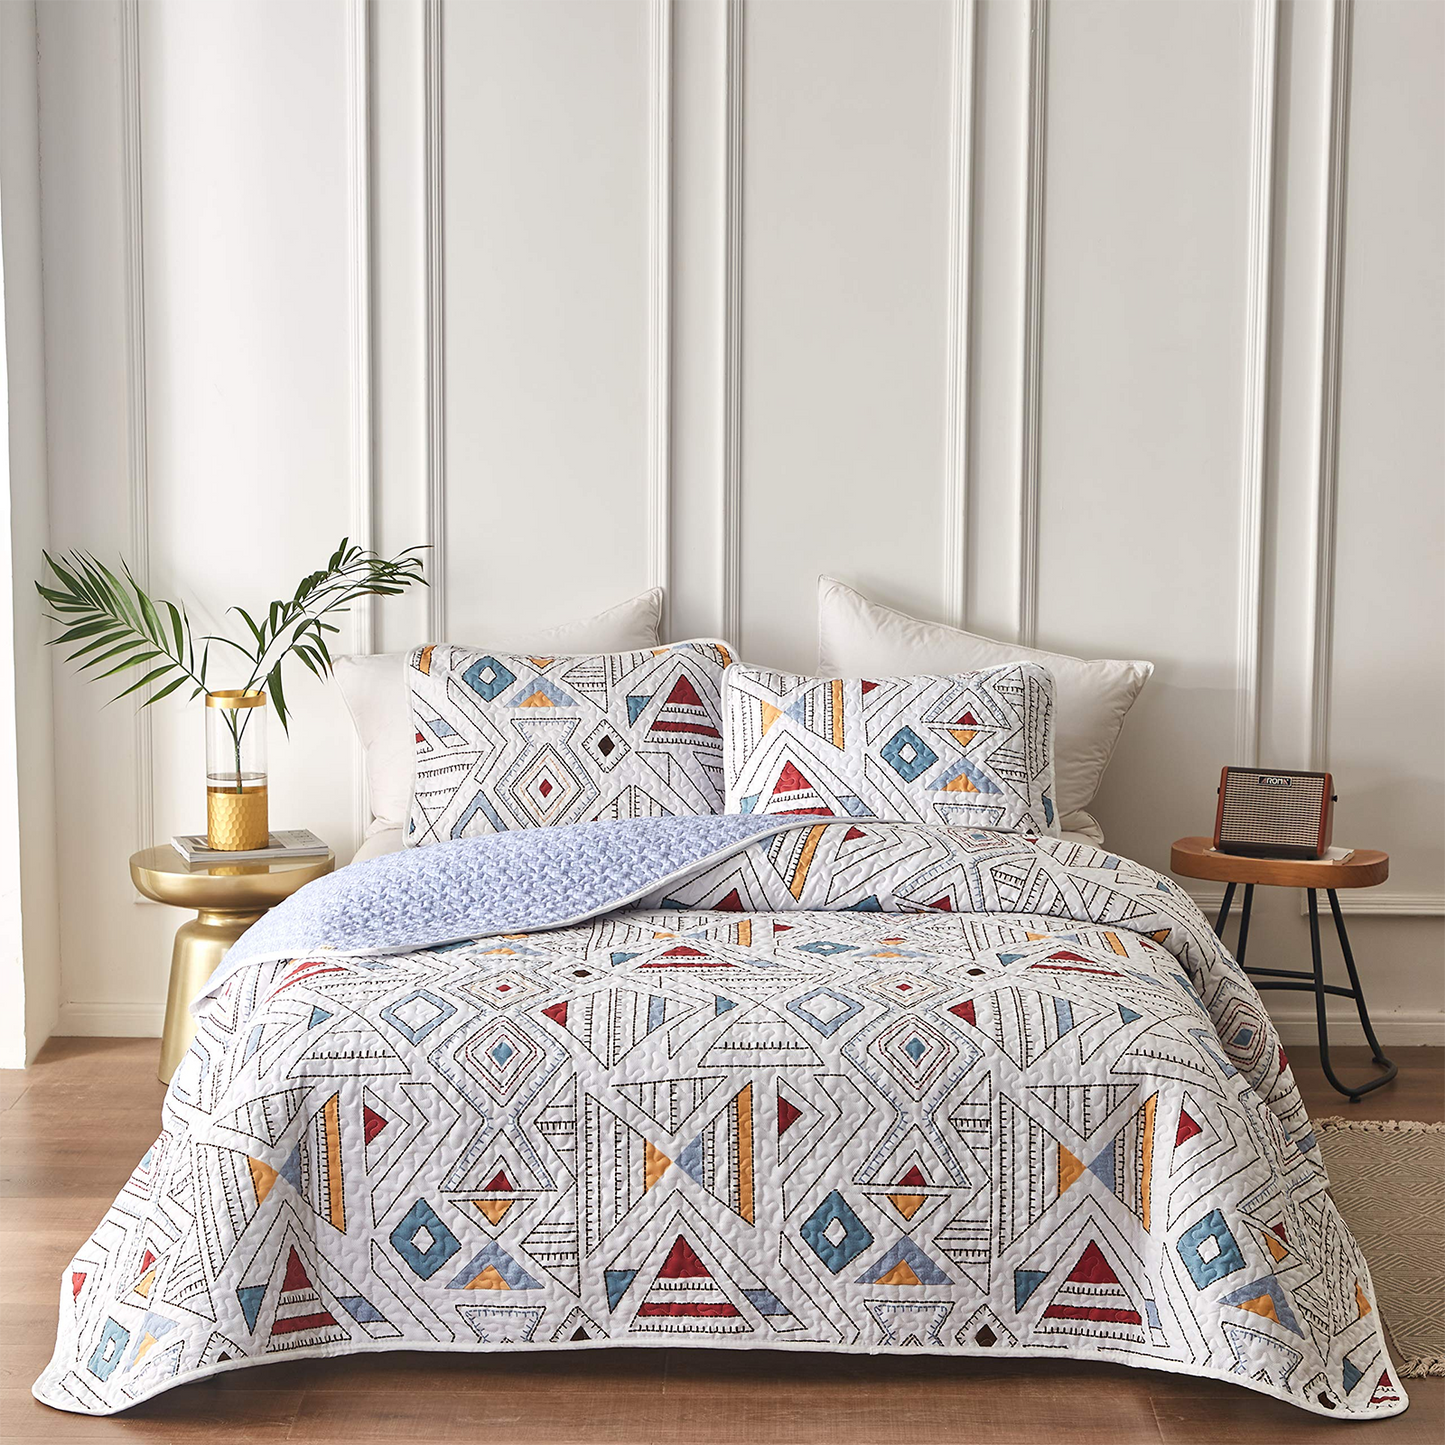 Triangular Geometric Pattern 3 Pieces Quilt Set with 2 Pillowcases